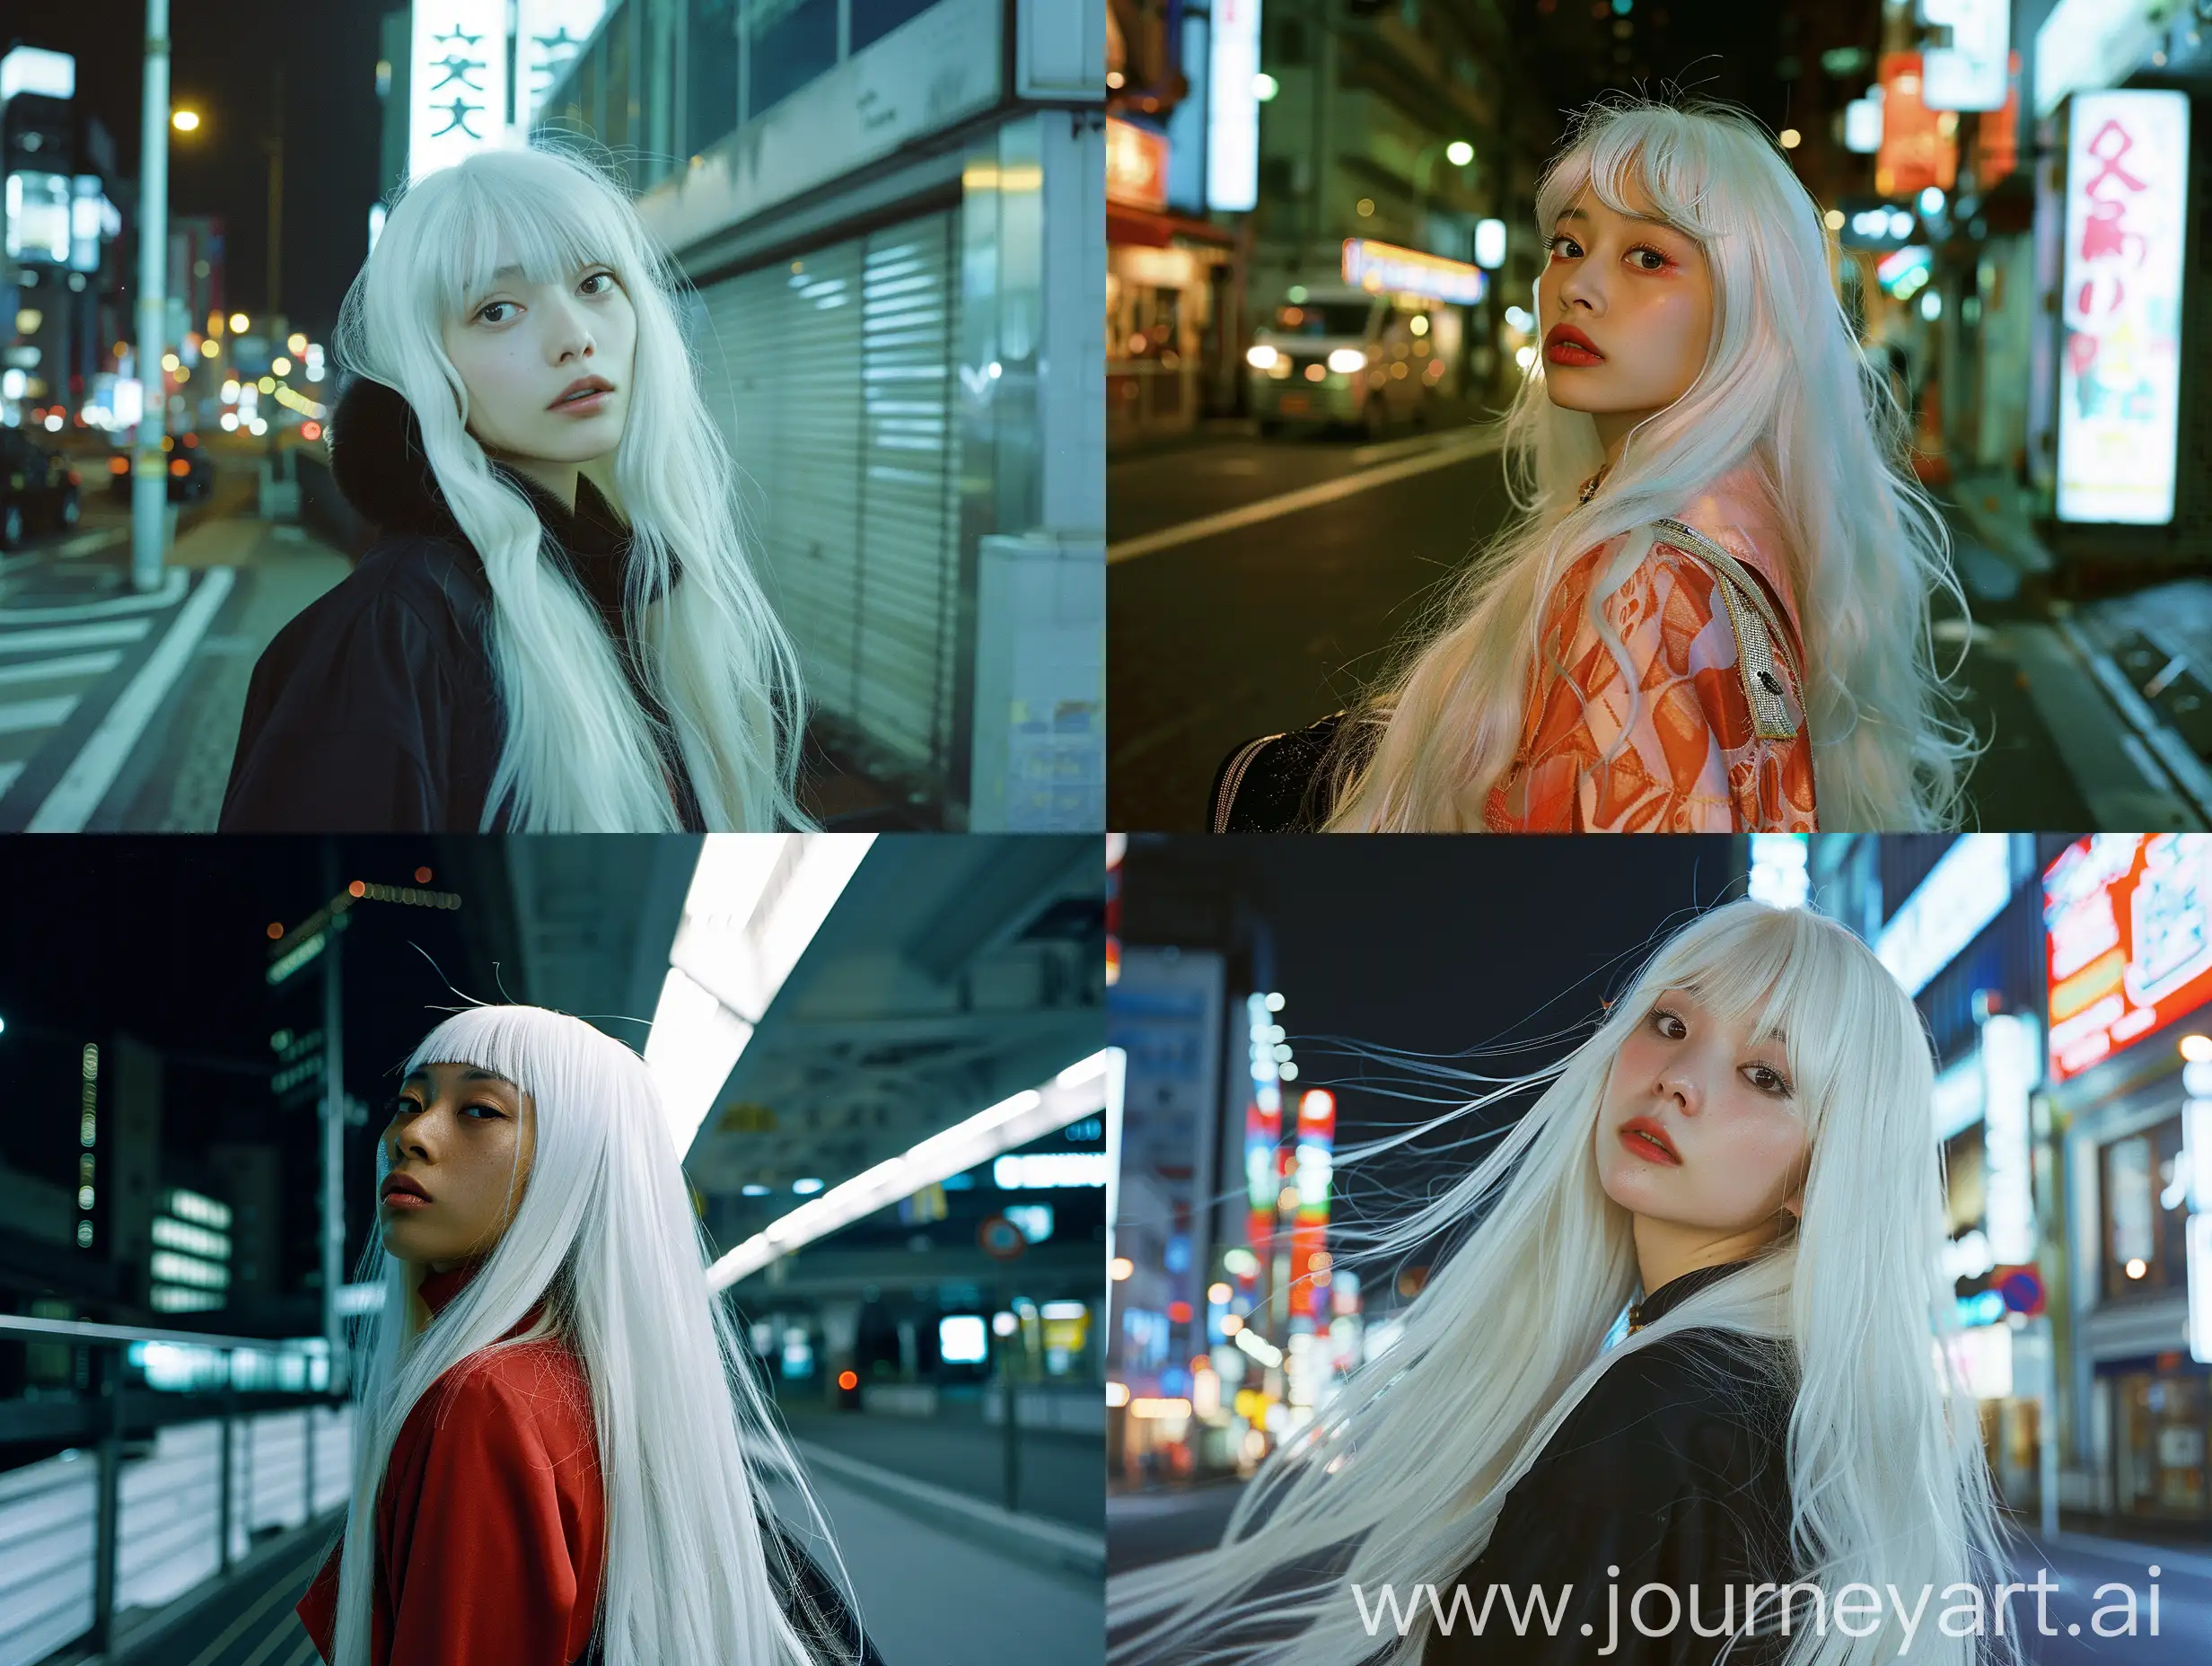 Tokyo-Night-Woman-with-Long-White-Hair-in-Futuristic-Outfit